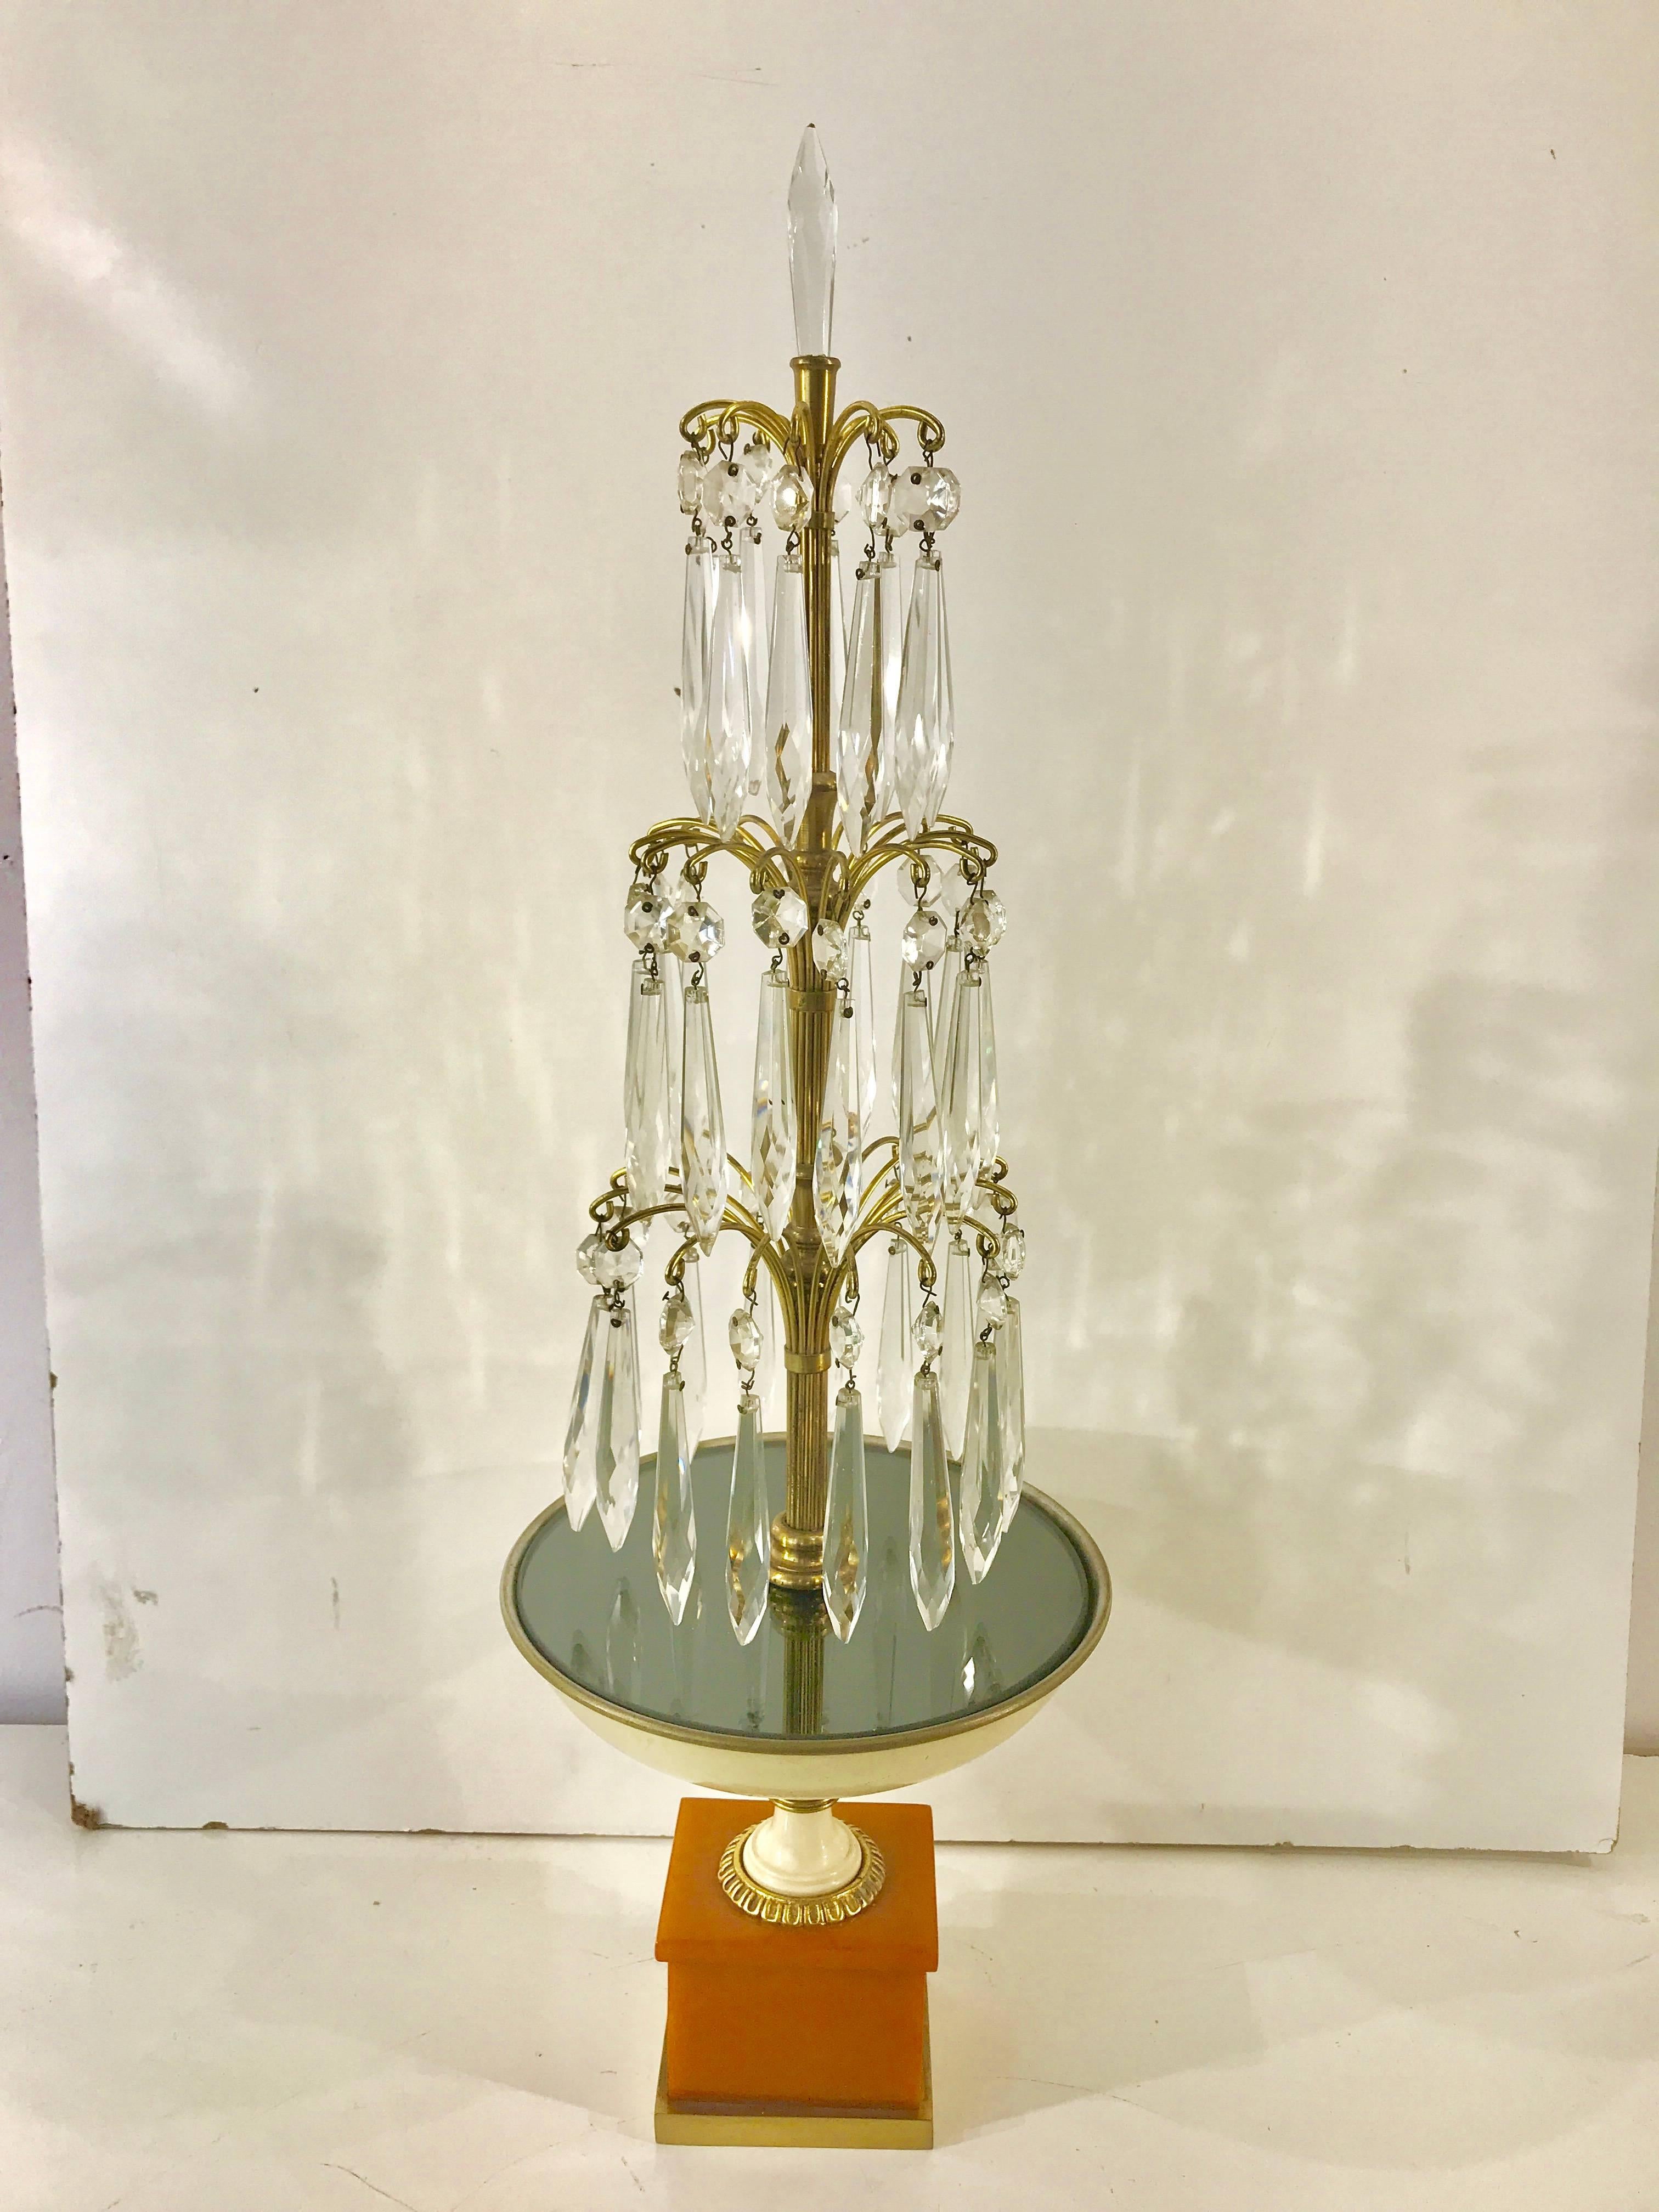 Pair of Art Deco fountain lamps, Provenance Edmonde Charles-Roux
Editor of French Vogue (1954–1966)
Each one of tiered brass with cascading crystal, grey mirror, enameled brass and bakelite pedestal bases
Measure: The base has a 3.5 inch square